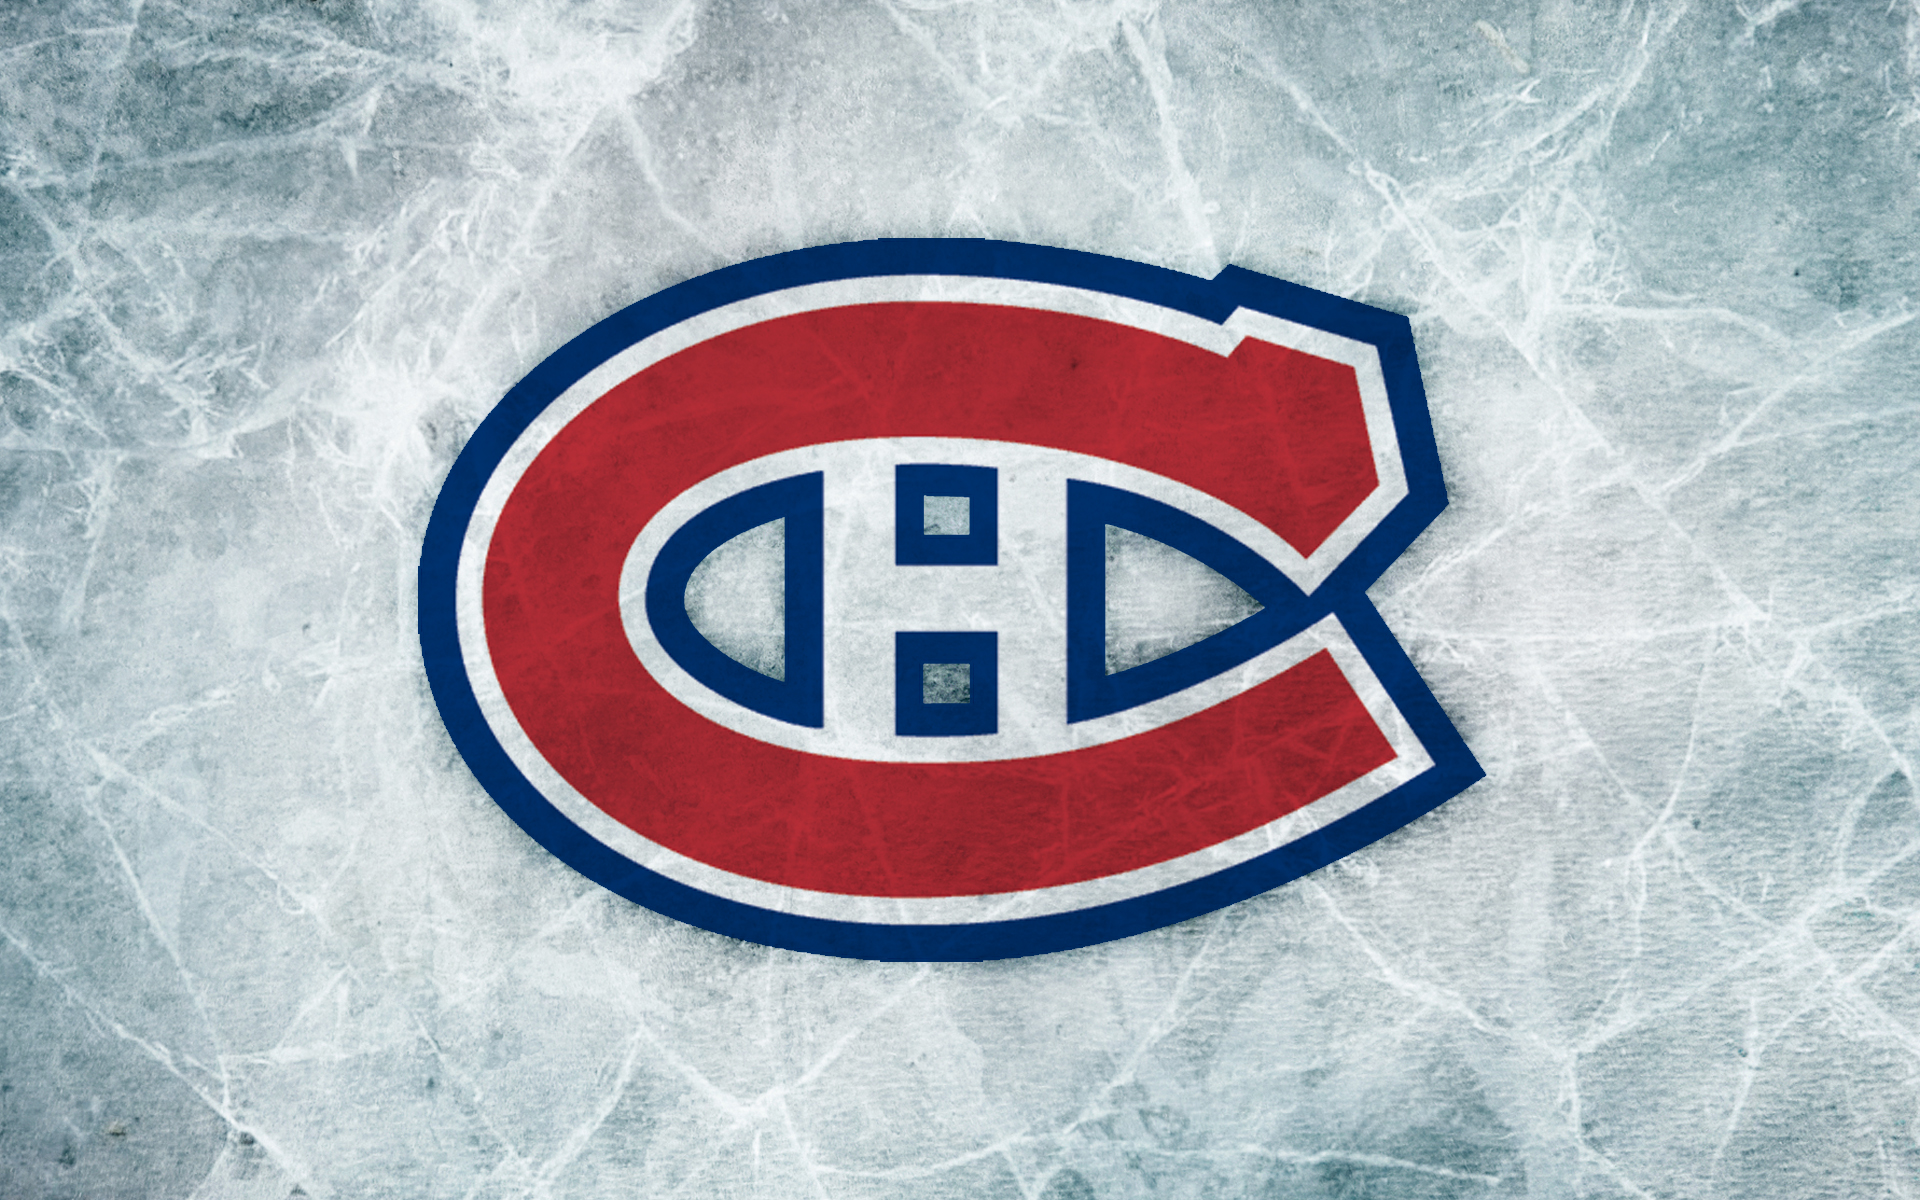 Montreal Canadians Tickets